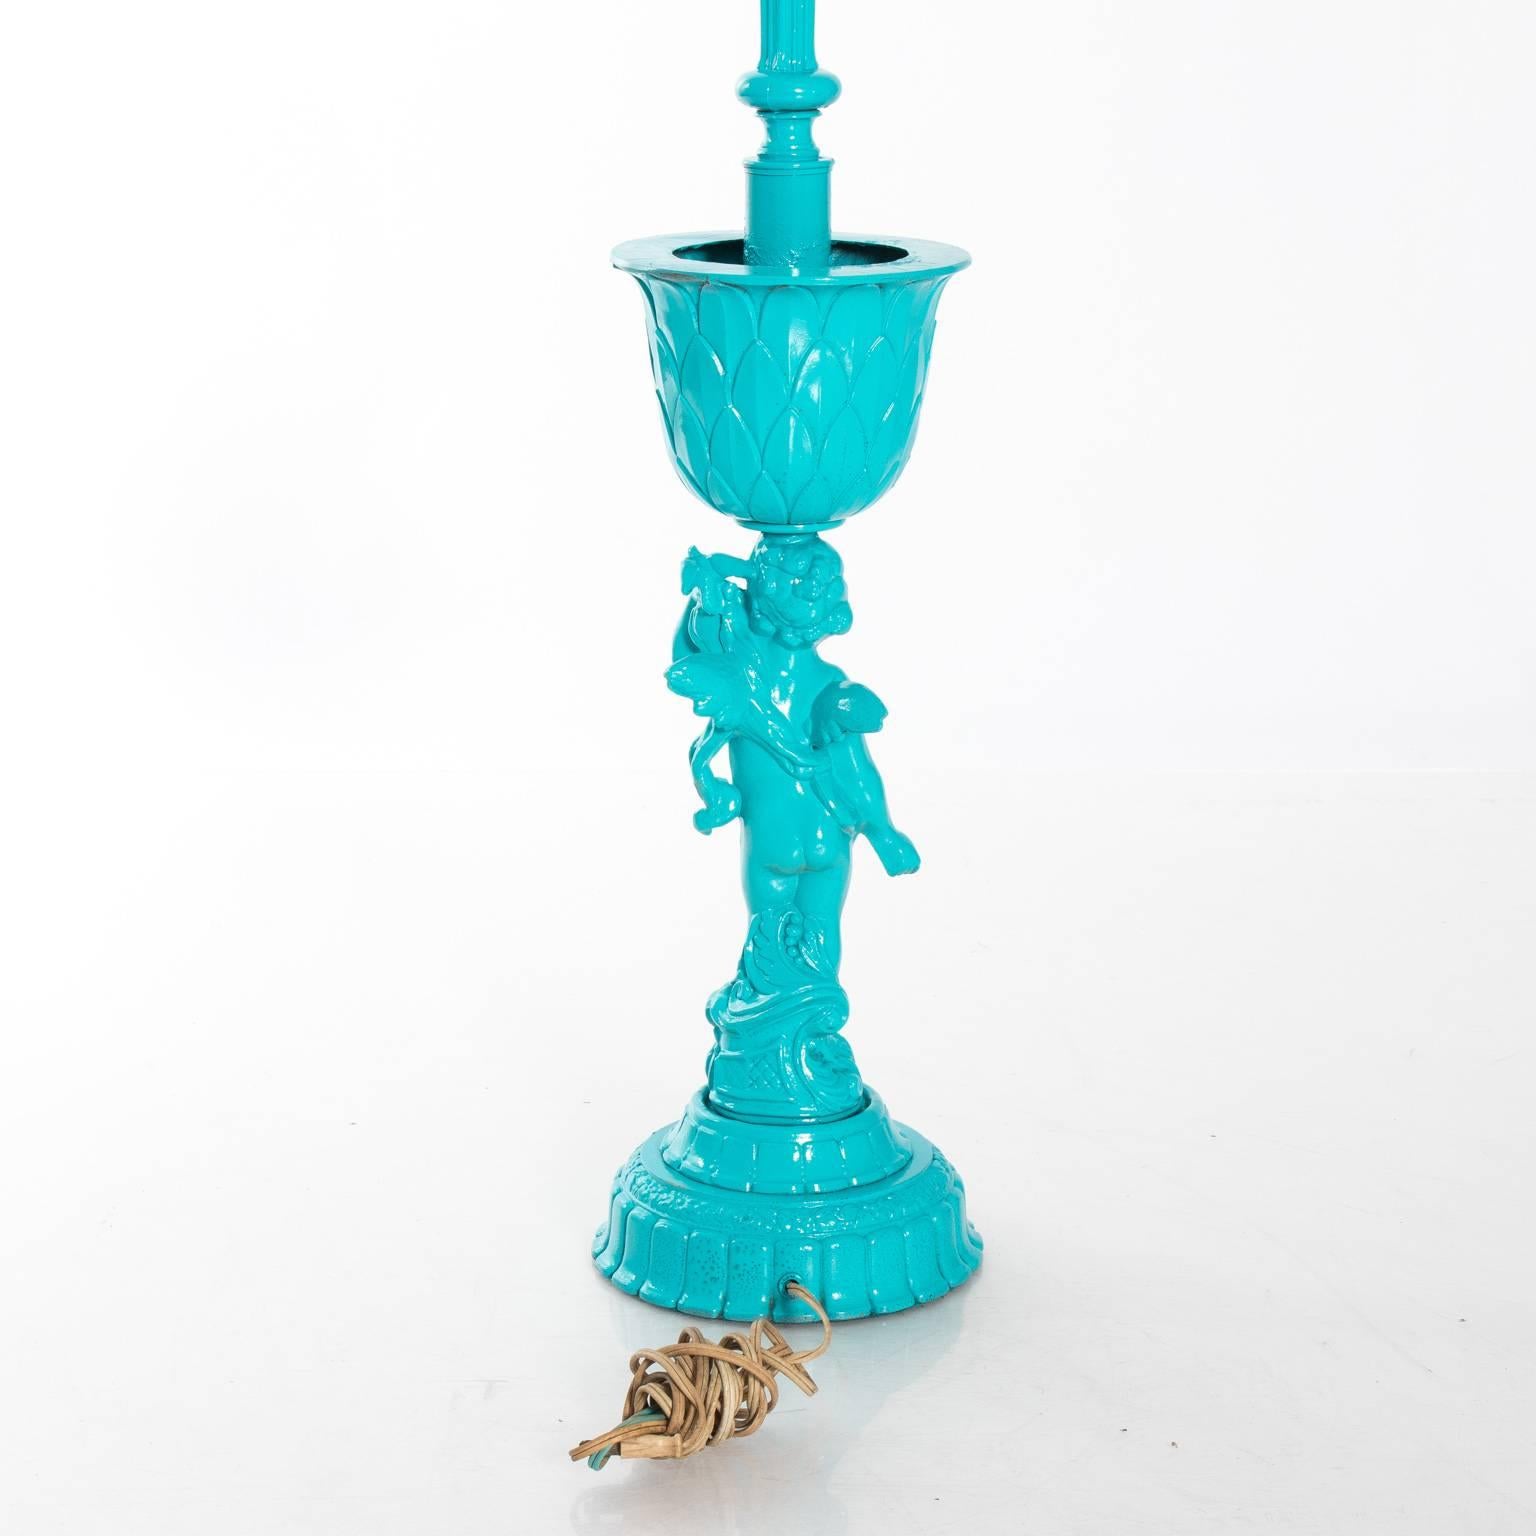 Painted Pair of Whimsical Hollywood Regency Style Table Lamps